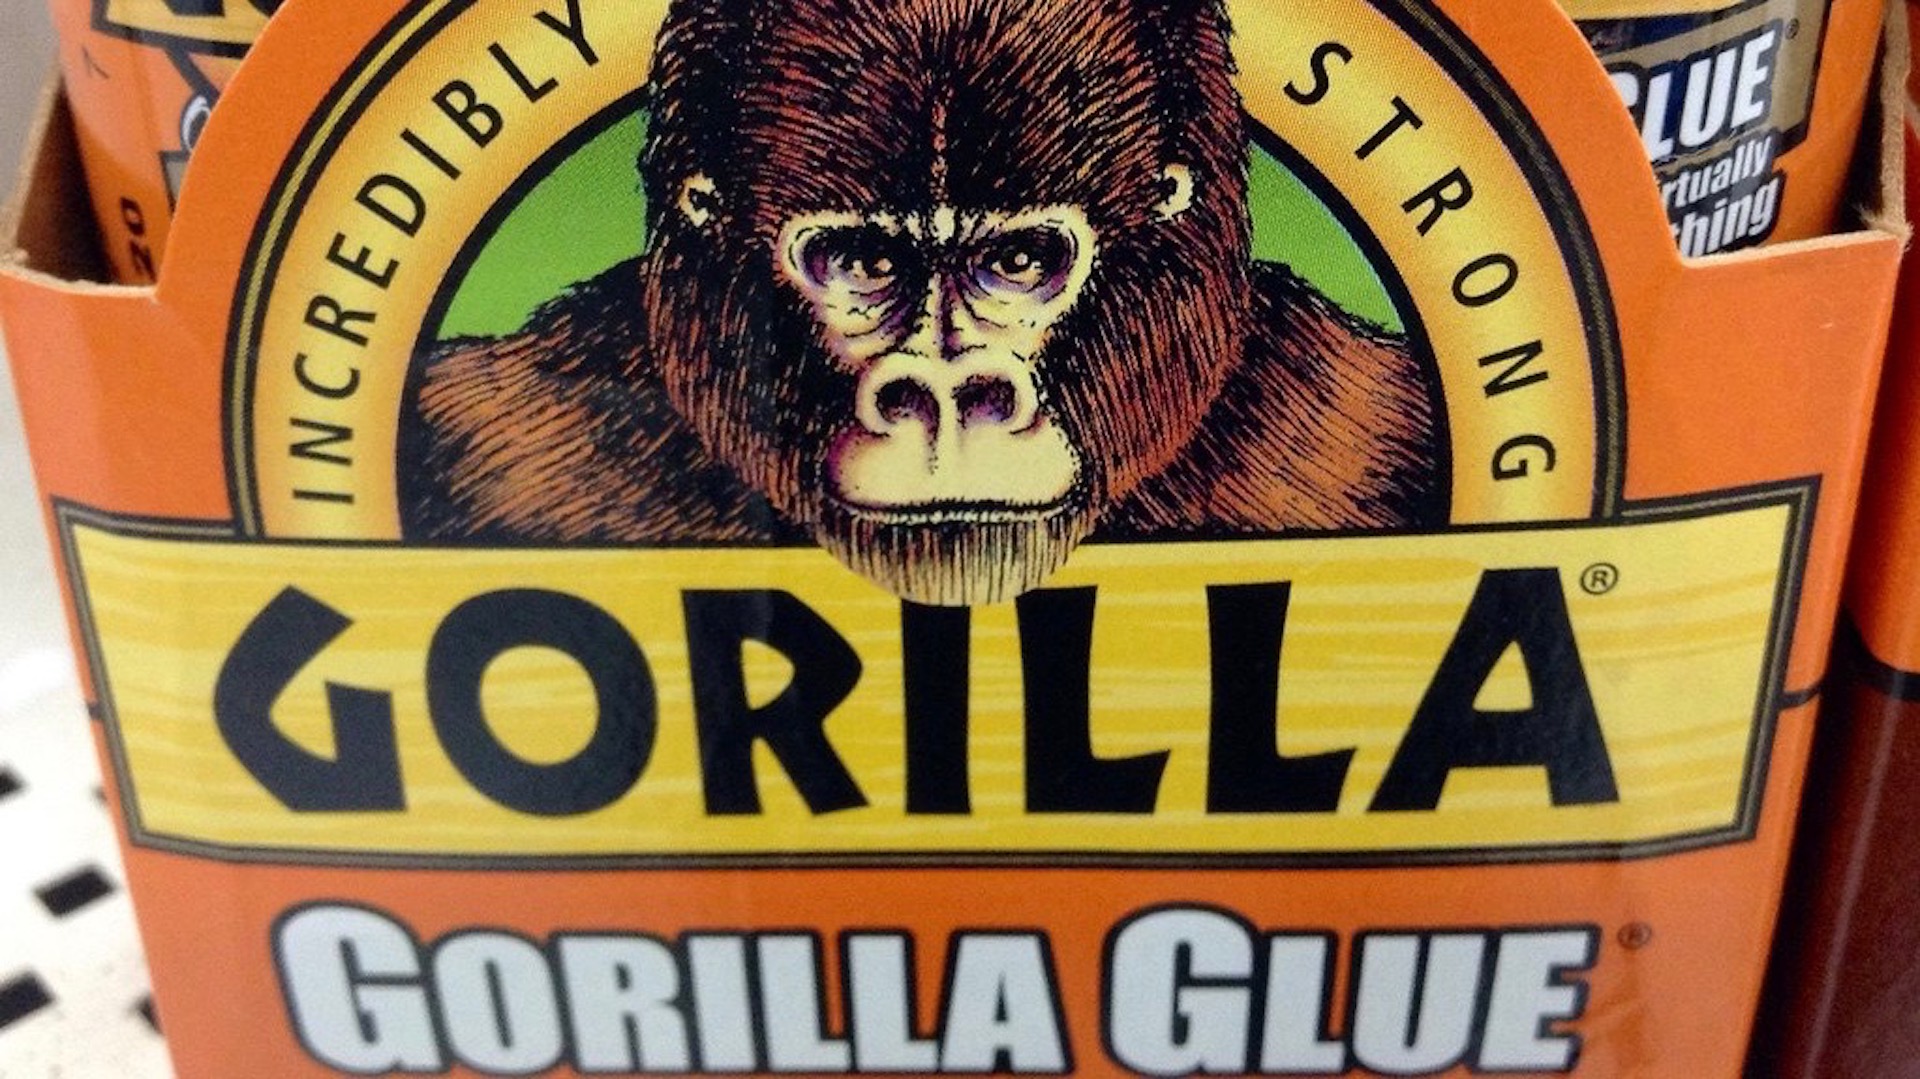 Woman Goes Viral After Using Gorilla Glue Spray on Her Hair: 'It. Don't. Move'